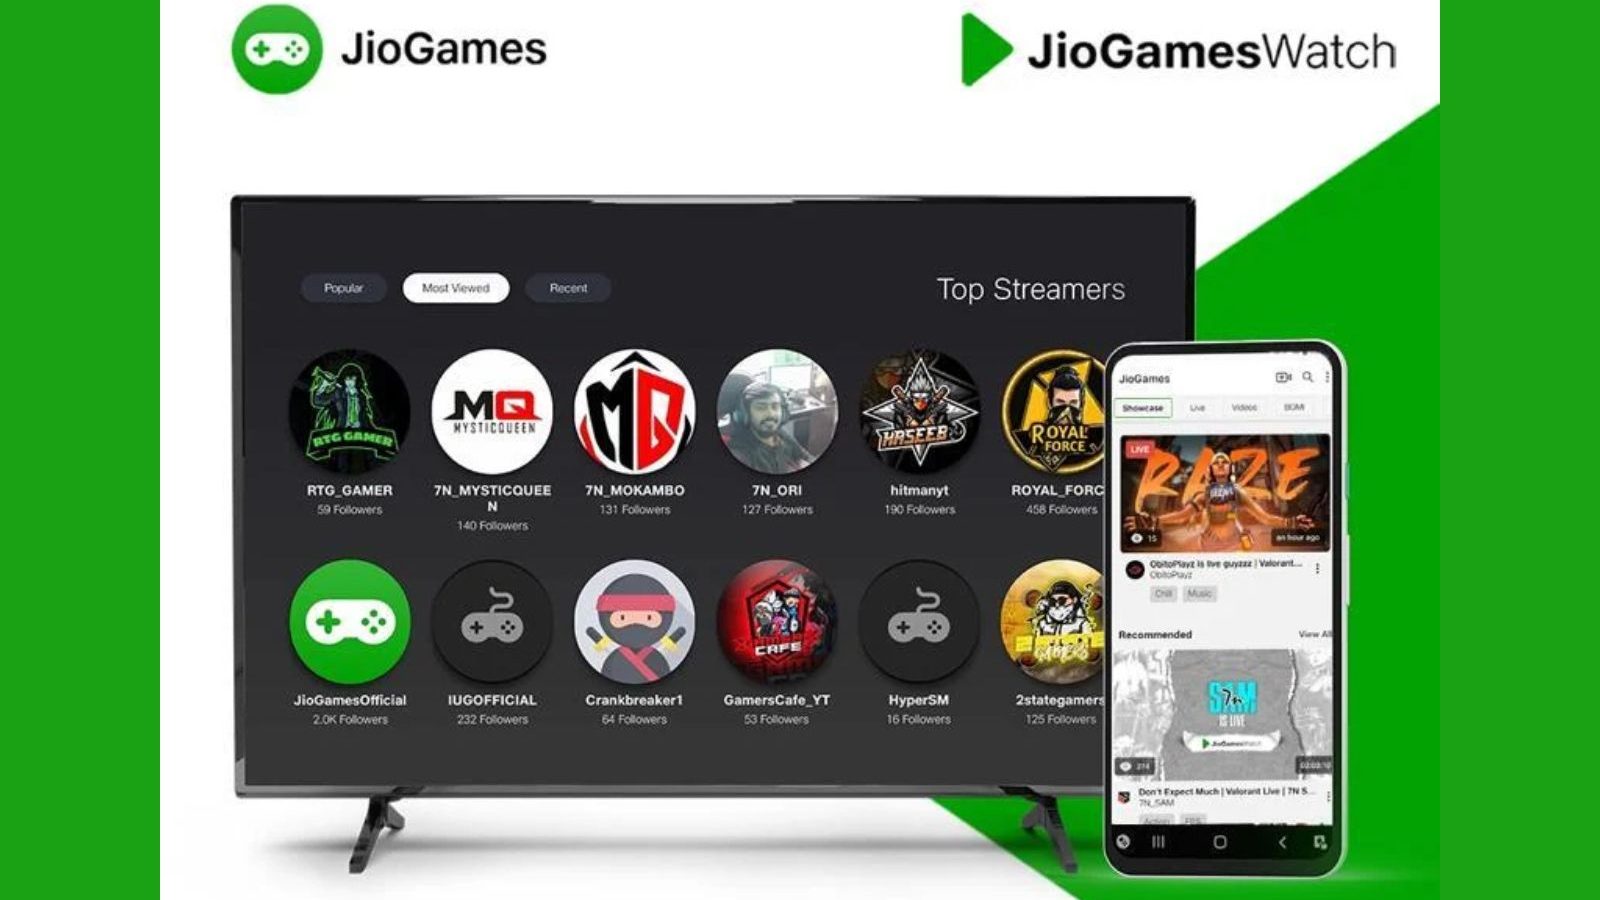 Reliance Jio Launches JioGamesWatch Streaming Platform For Gamers: All You Need To Know - News18